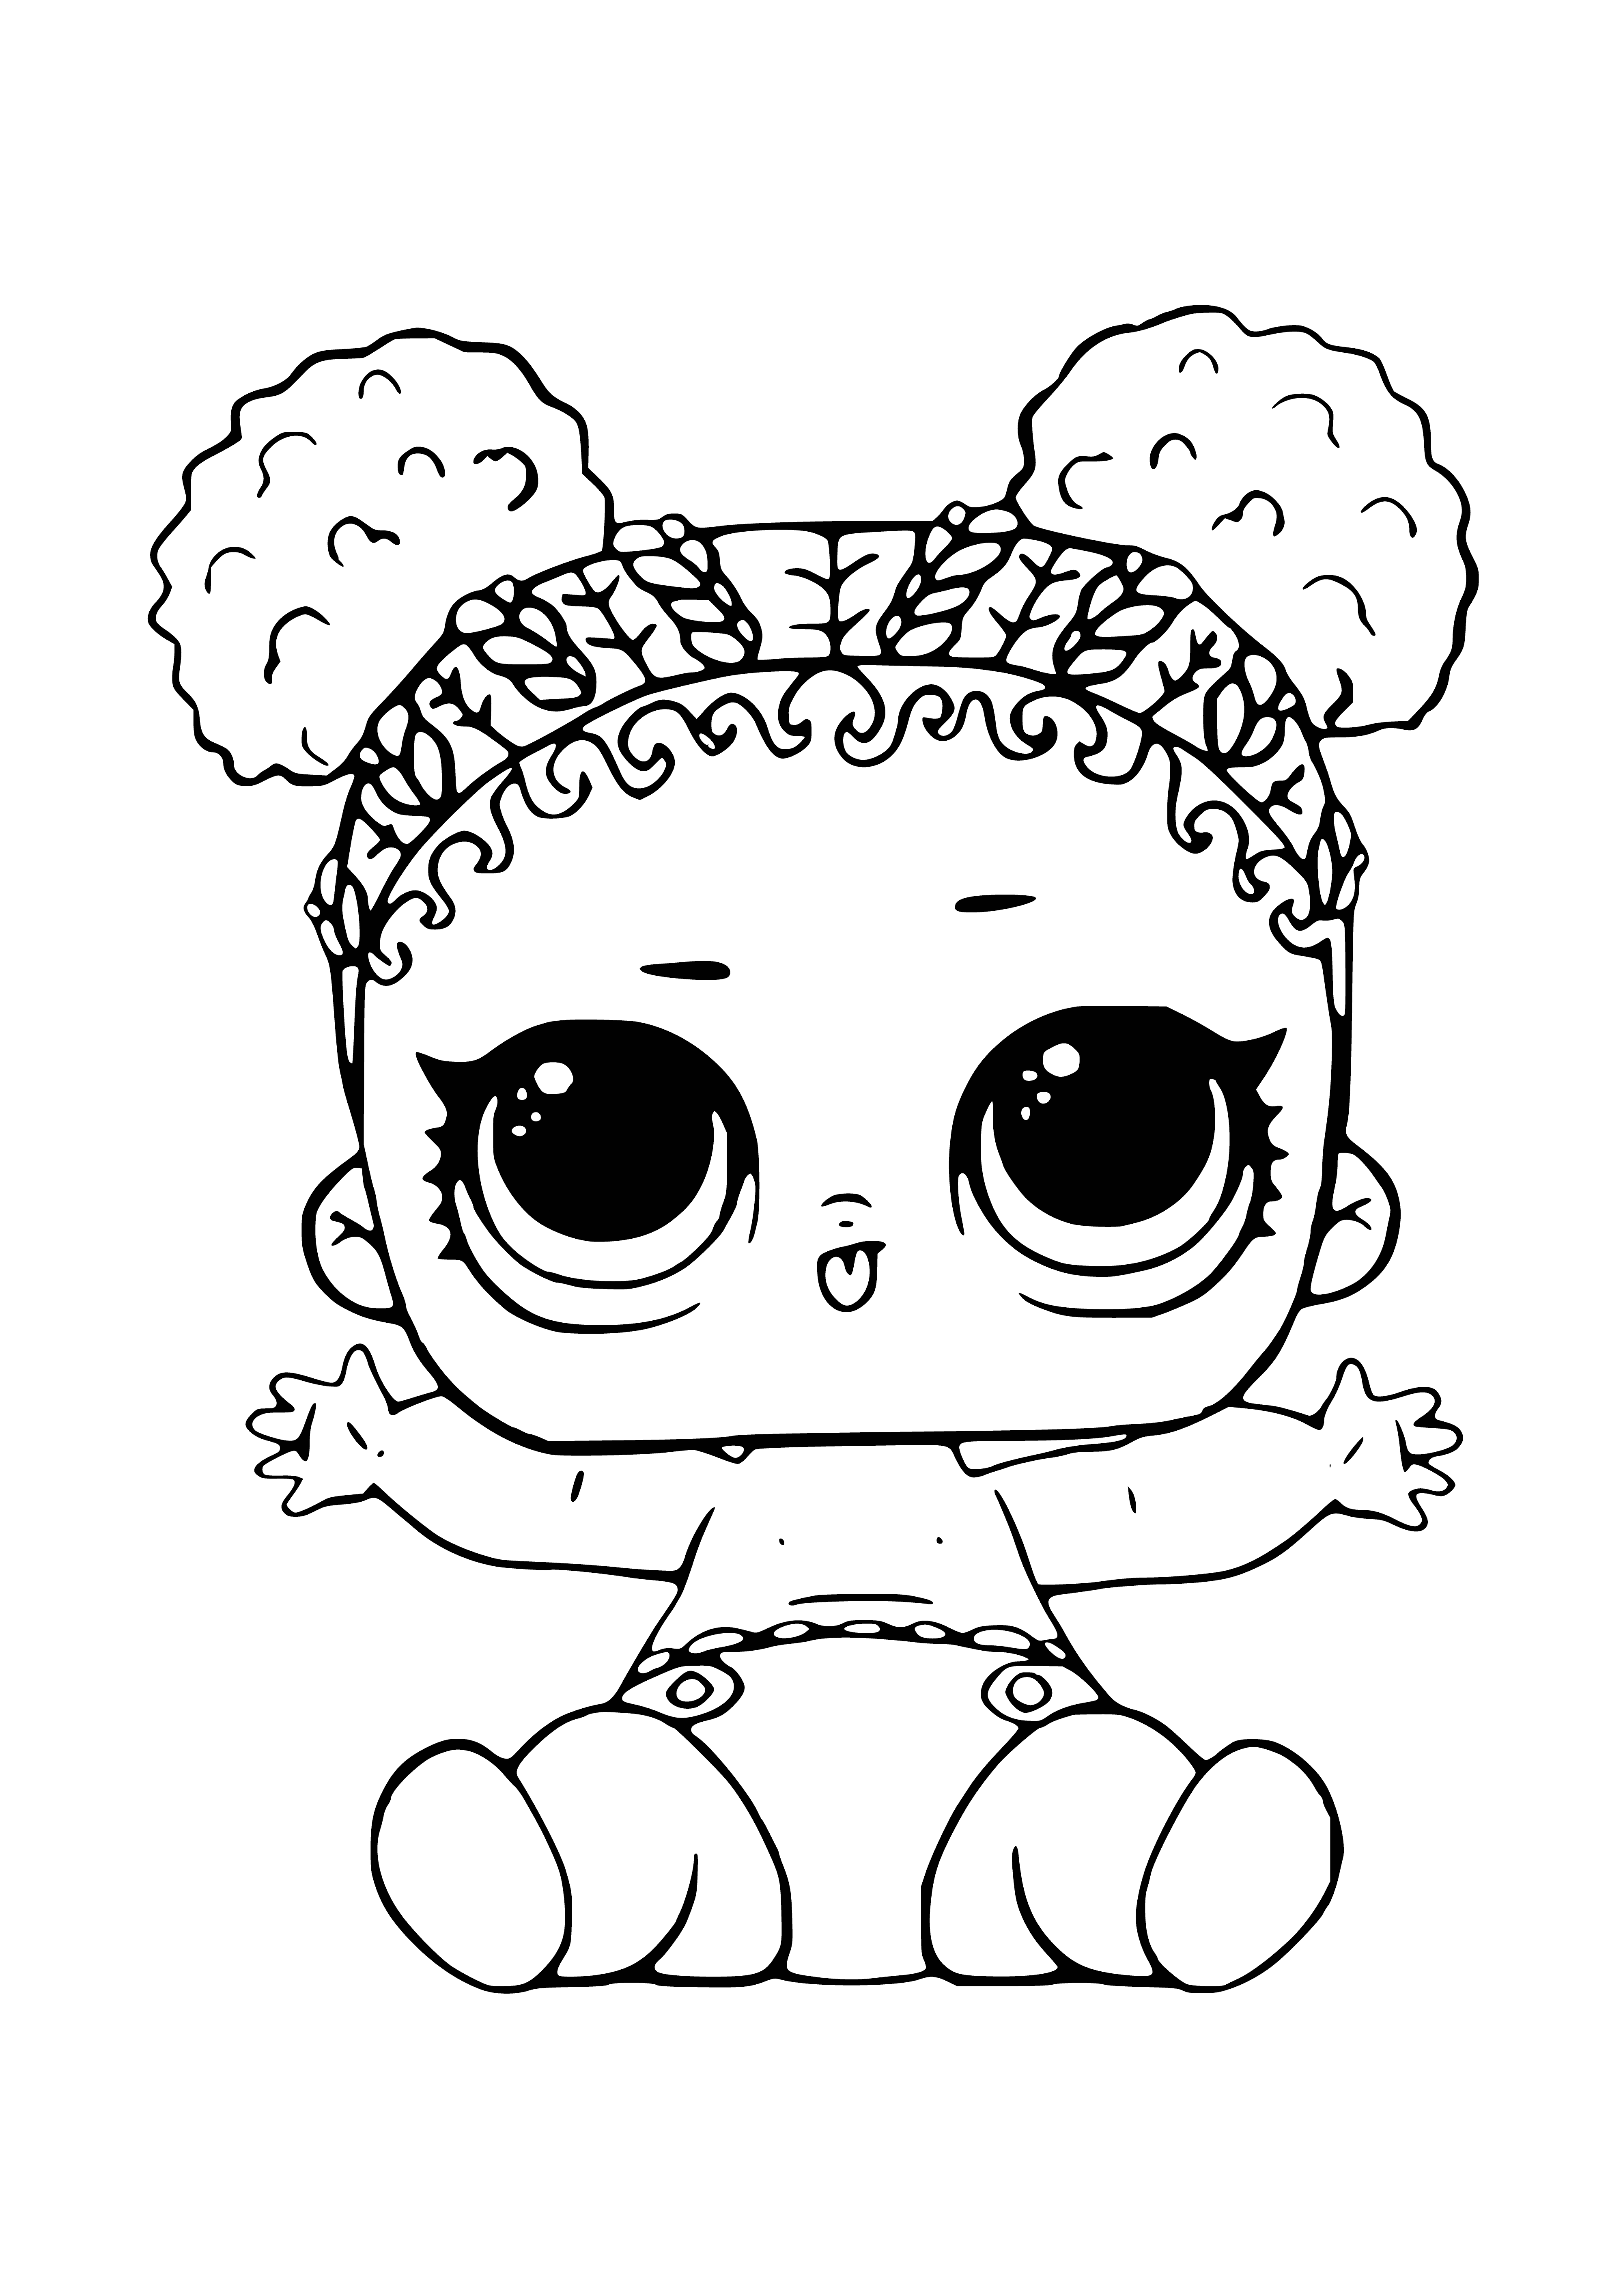 coloring page: Tongue-sticking LOL baby Accuser wears blue & white shirt; has blue eyes.